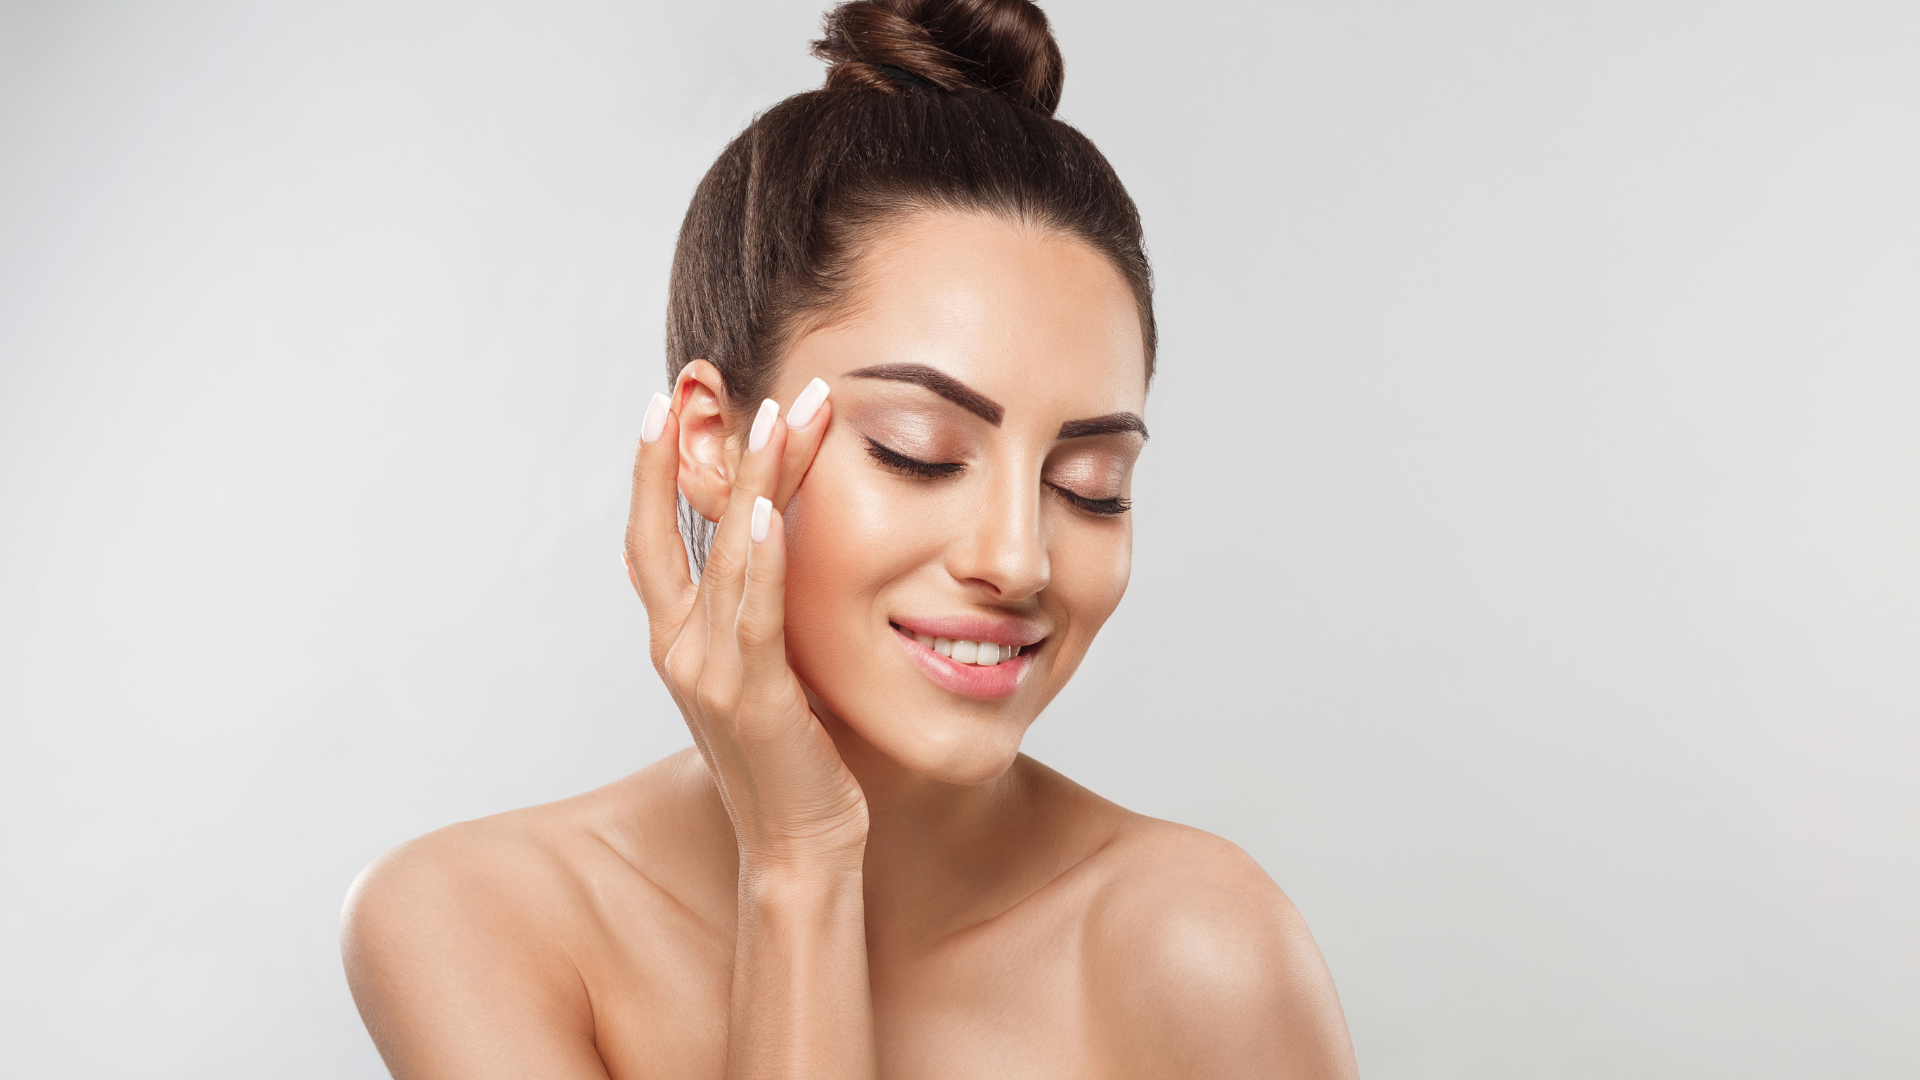 A woman enjoying facial services | Physician's Institute